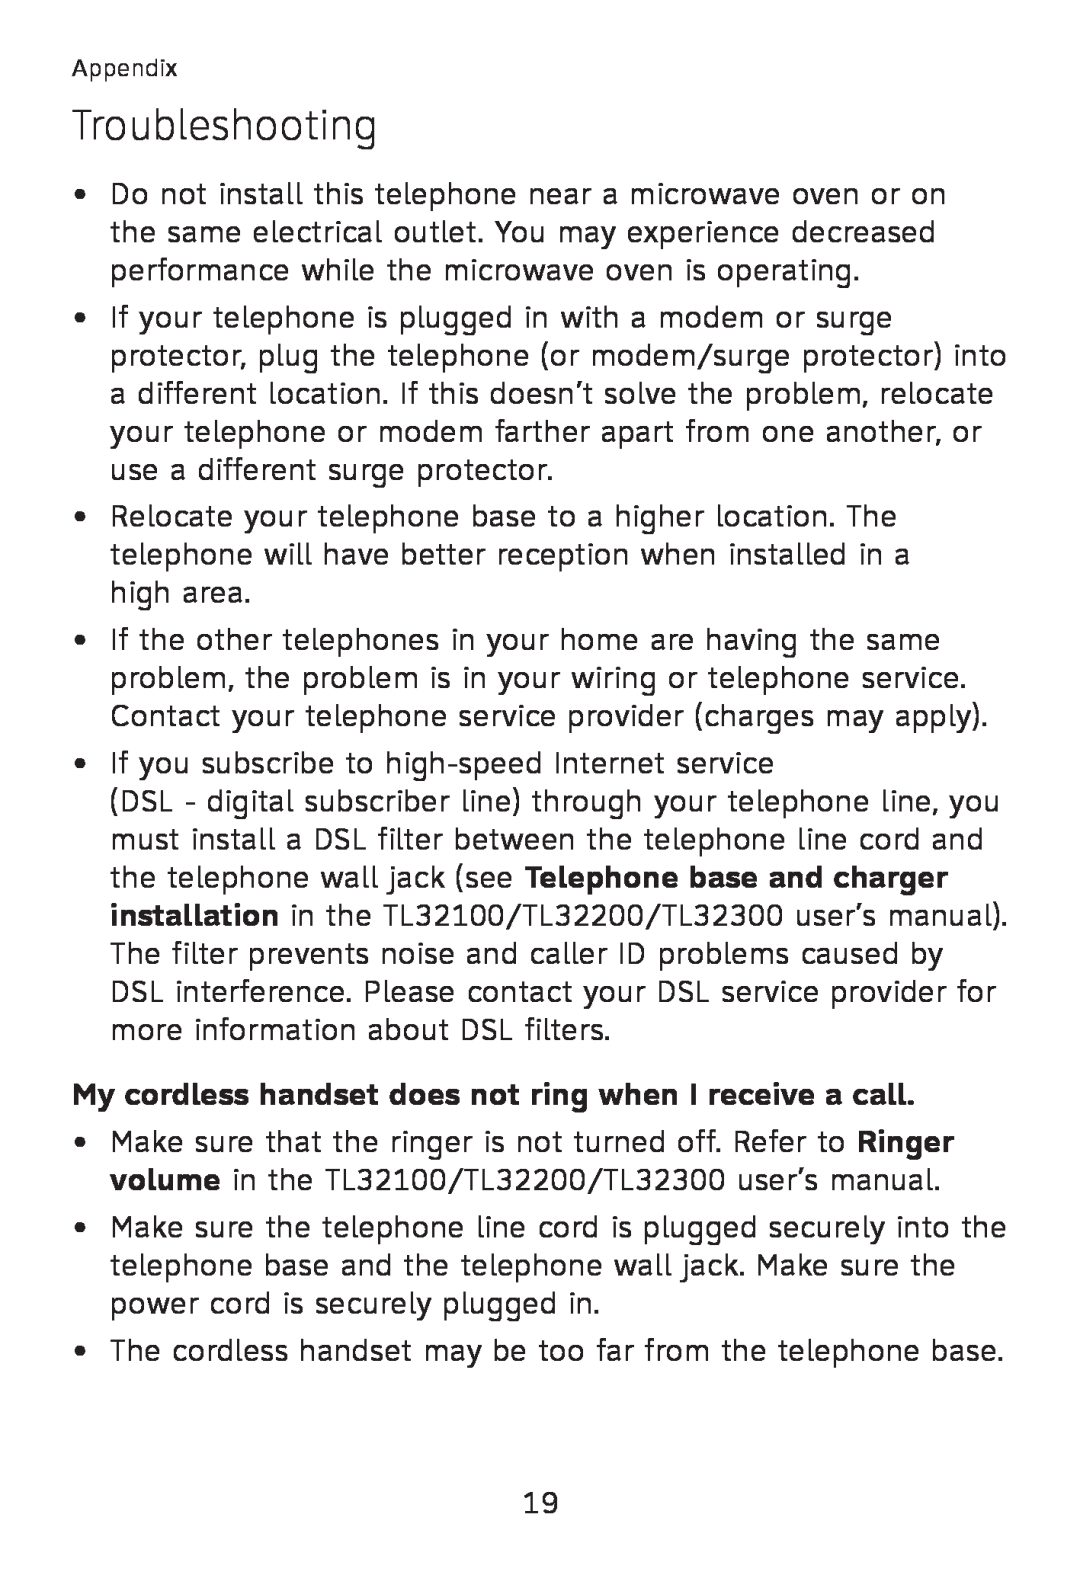 AT&T TL30100, TL32300, TL32100, TL32200 user manual My cordless handset does not ring when I receive a call, Troubleshooting 